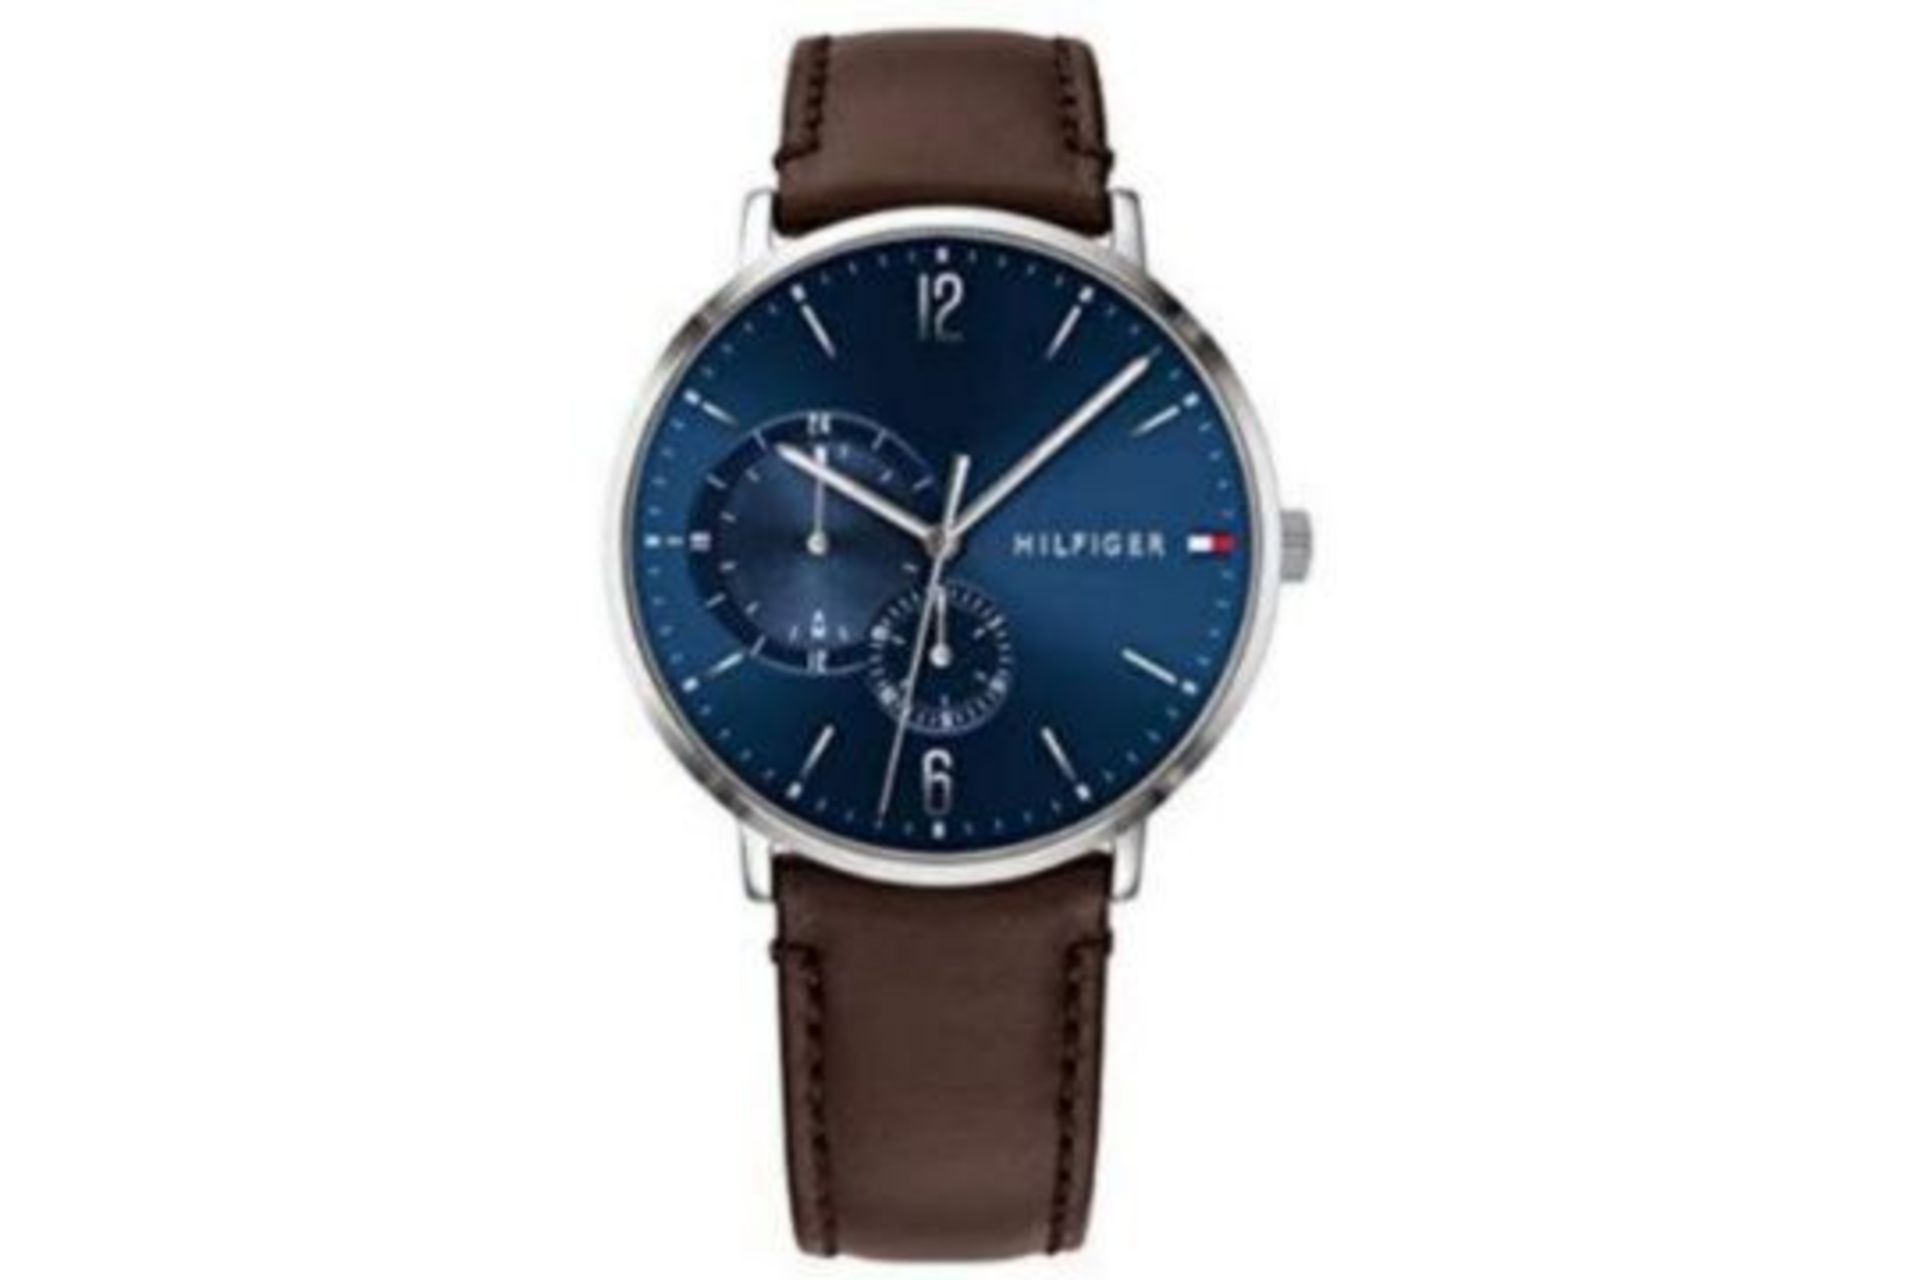 BRAND NEW RETAIL BOXED TOMMY HILFIGER BROOKLYN MULTI FUNCTION MENS ANALOG BLUE CASUAL QUARTZ WATCH